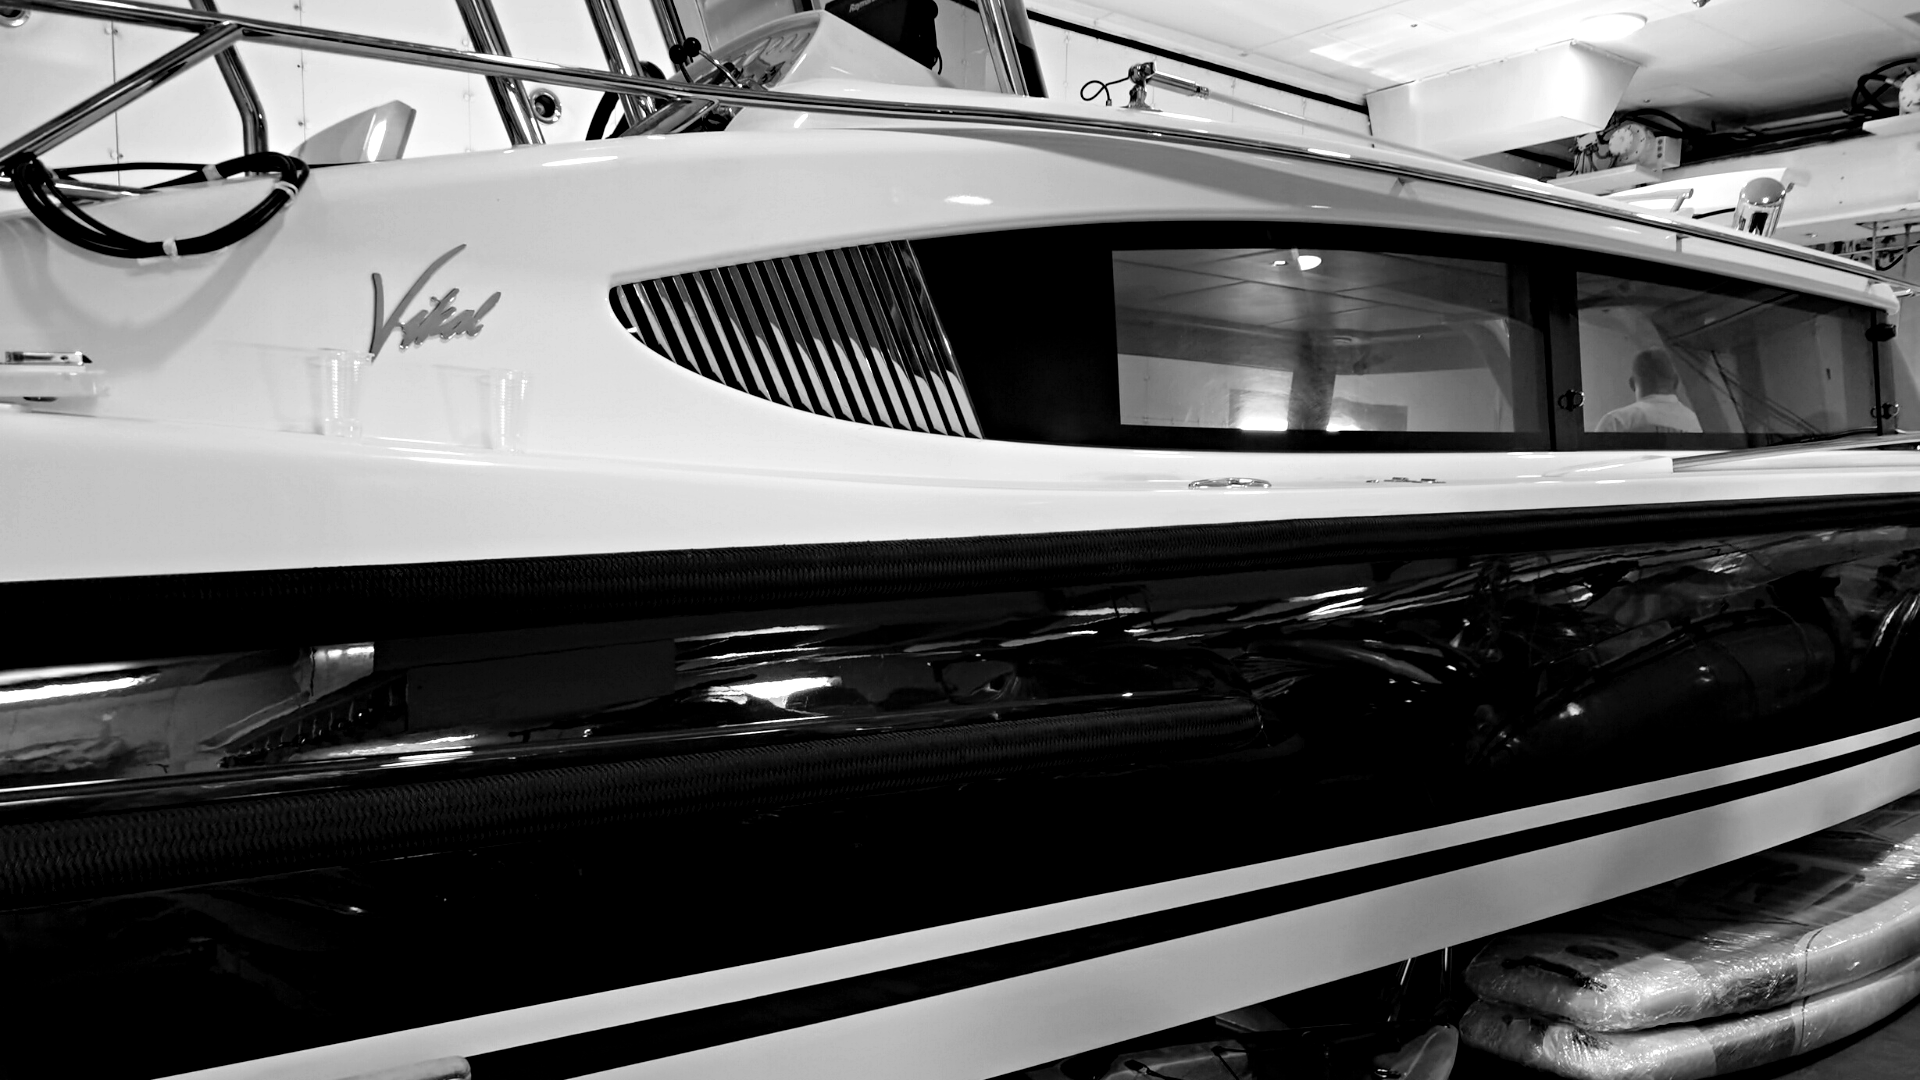 Complete customised re-upholstery exterior cushions in the aft and forward cockpit for superyacht jet tender VIKAL 12 m.